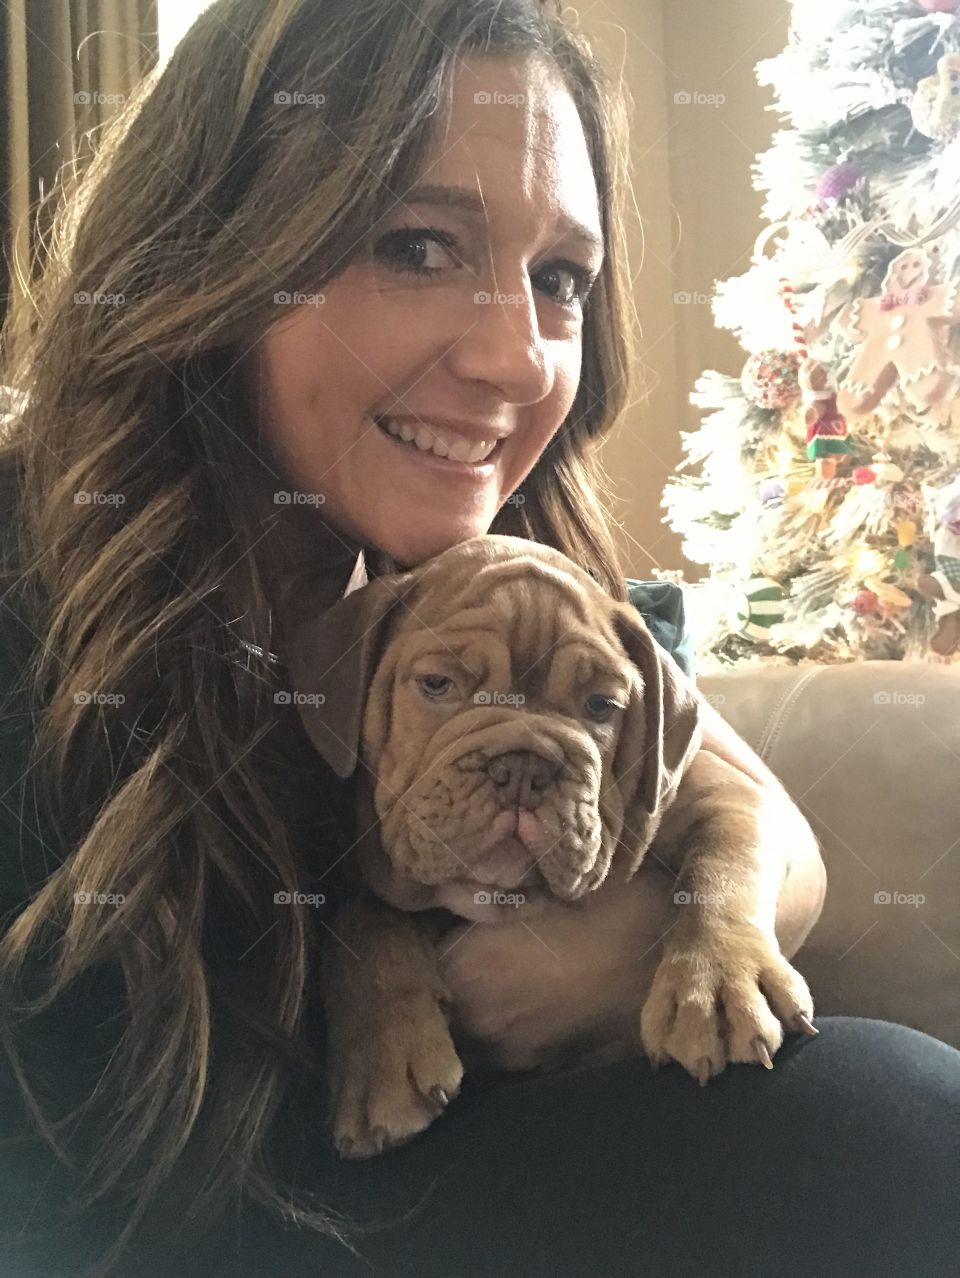 Cuddling with an adorable bulldog puppy in front of a Christmas tree. 